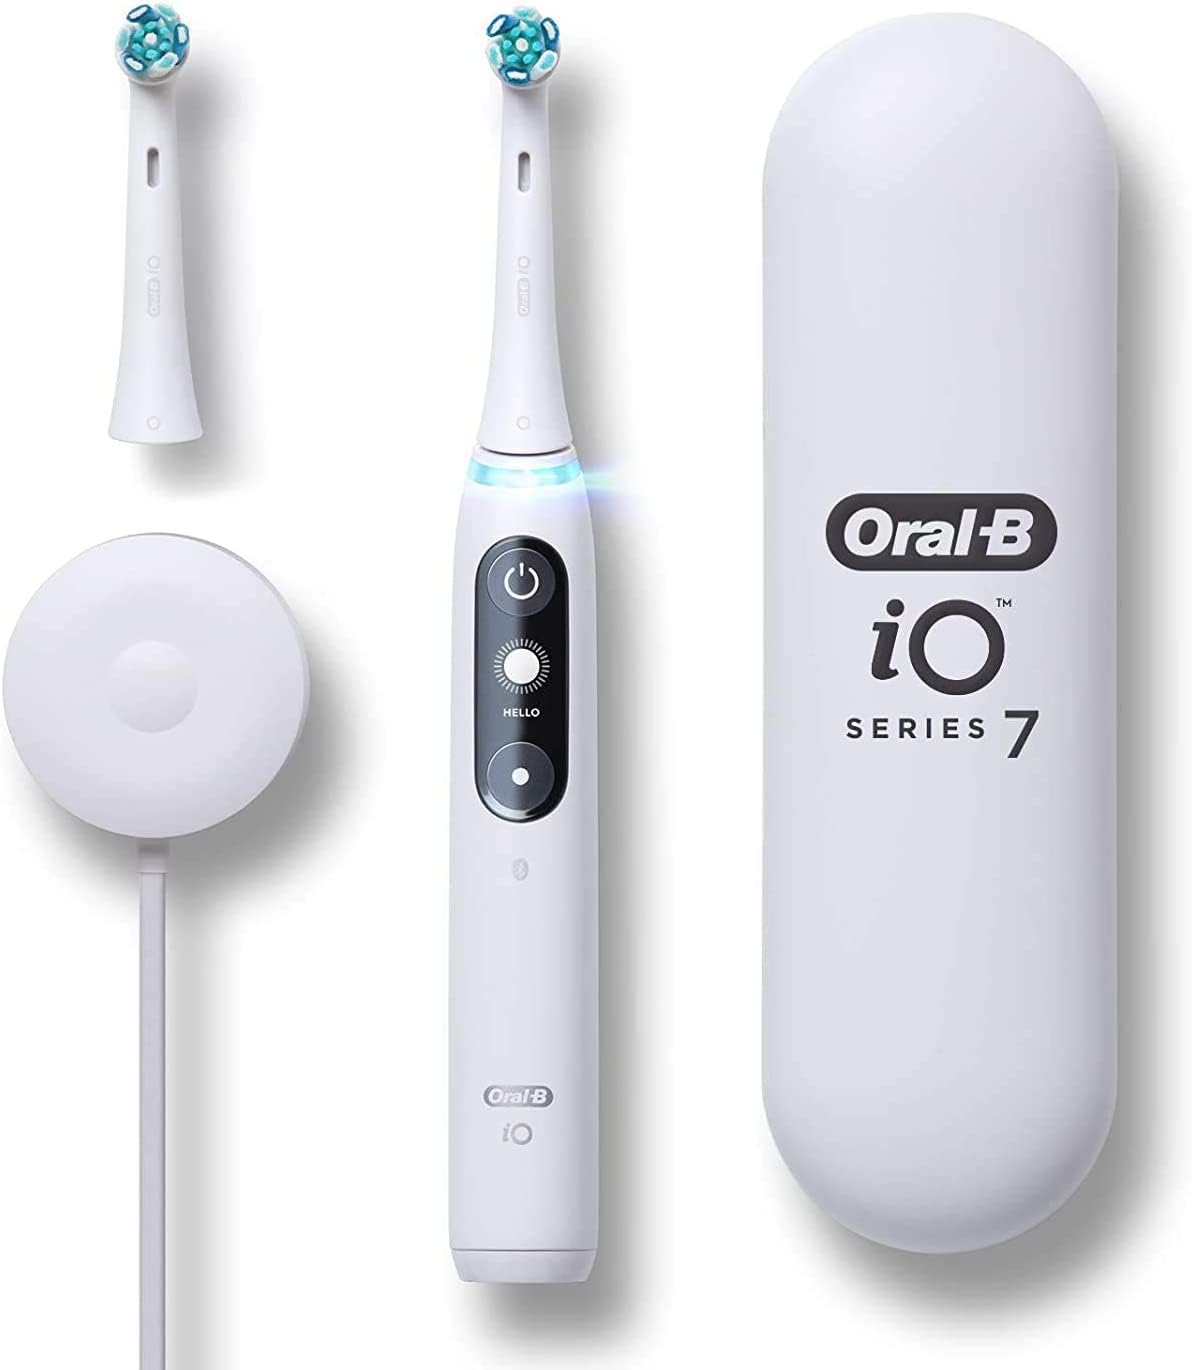 Oral-B iO Series 7 Electric Toothbrush with 1 Replacement Brush Head, White Alabaster $149.99